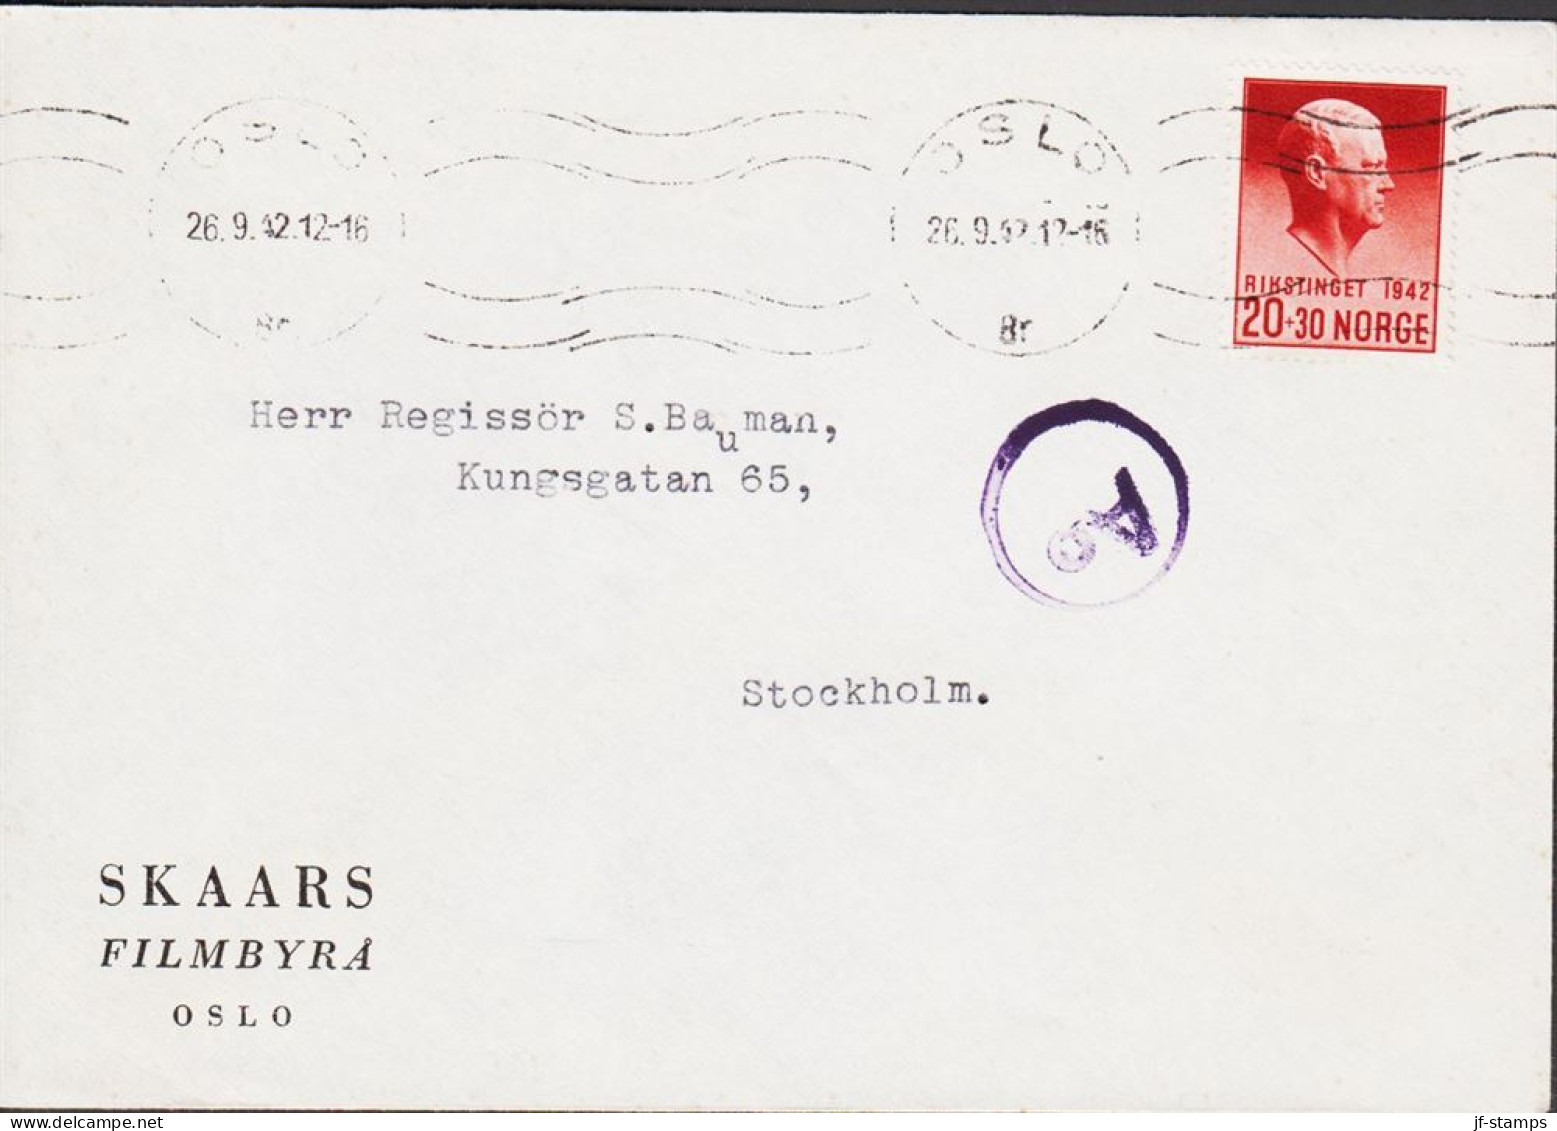 1944. NORGE. Fine Envelope To Sverige With 20+30 ØRE Quisling RIKSTINGET 1942 Cancelled OSLO ... (Michel 271) - JF545672 - Covers & Documents